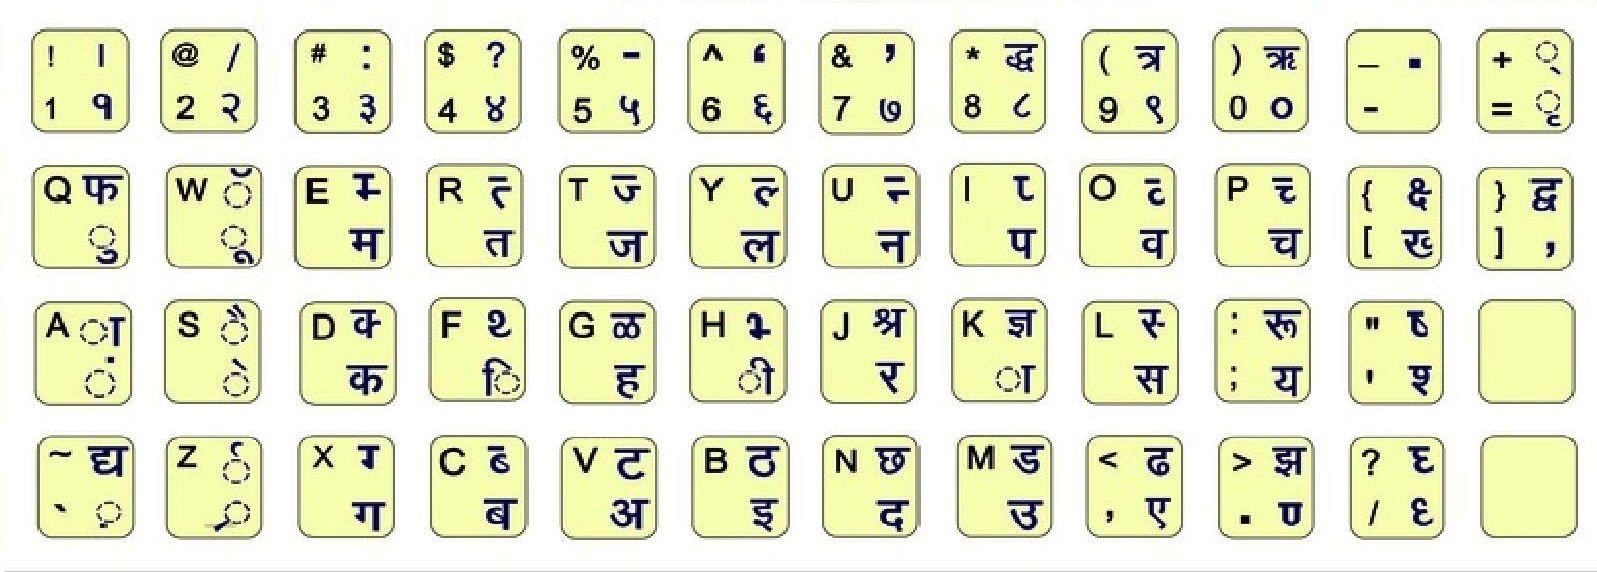 CPCT hindi typing test online 2020 Archives - Typing Speed Test Online